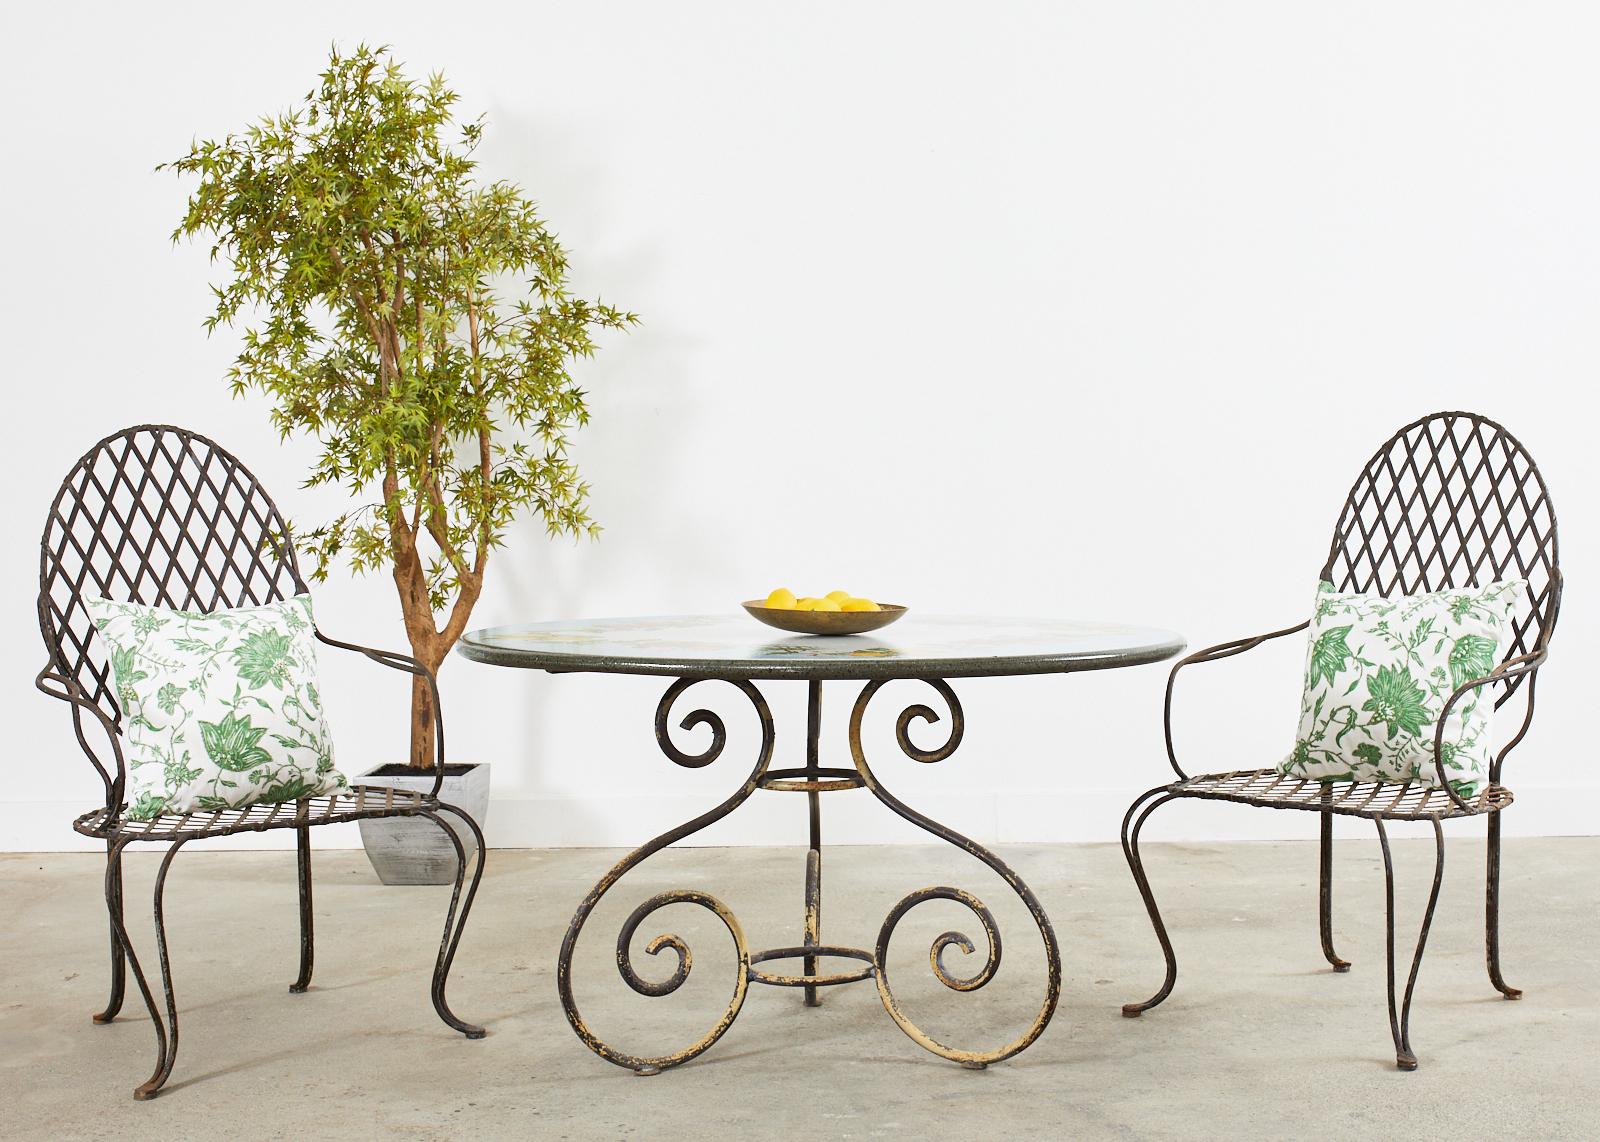 Gorgeous set of four iron patio and garden dining armchairs attributed to Rose Tarlow Melrose House Los Angeles, CA. The set features a large faux bois twig motif iron frame with geometrical lattice inset. The iron has an intentionally aged,